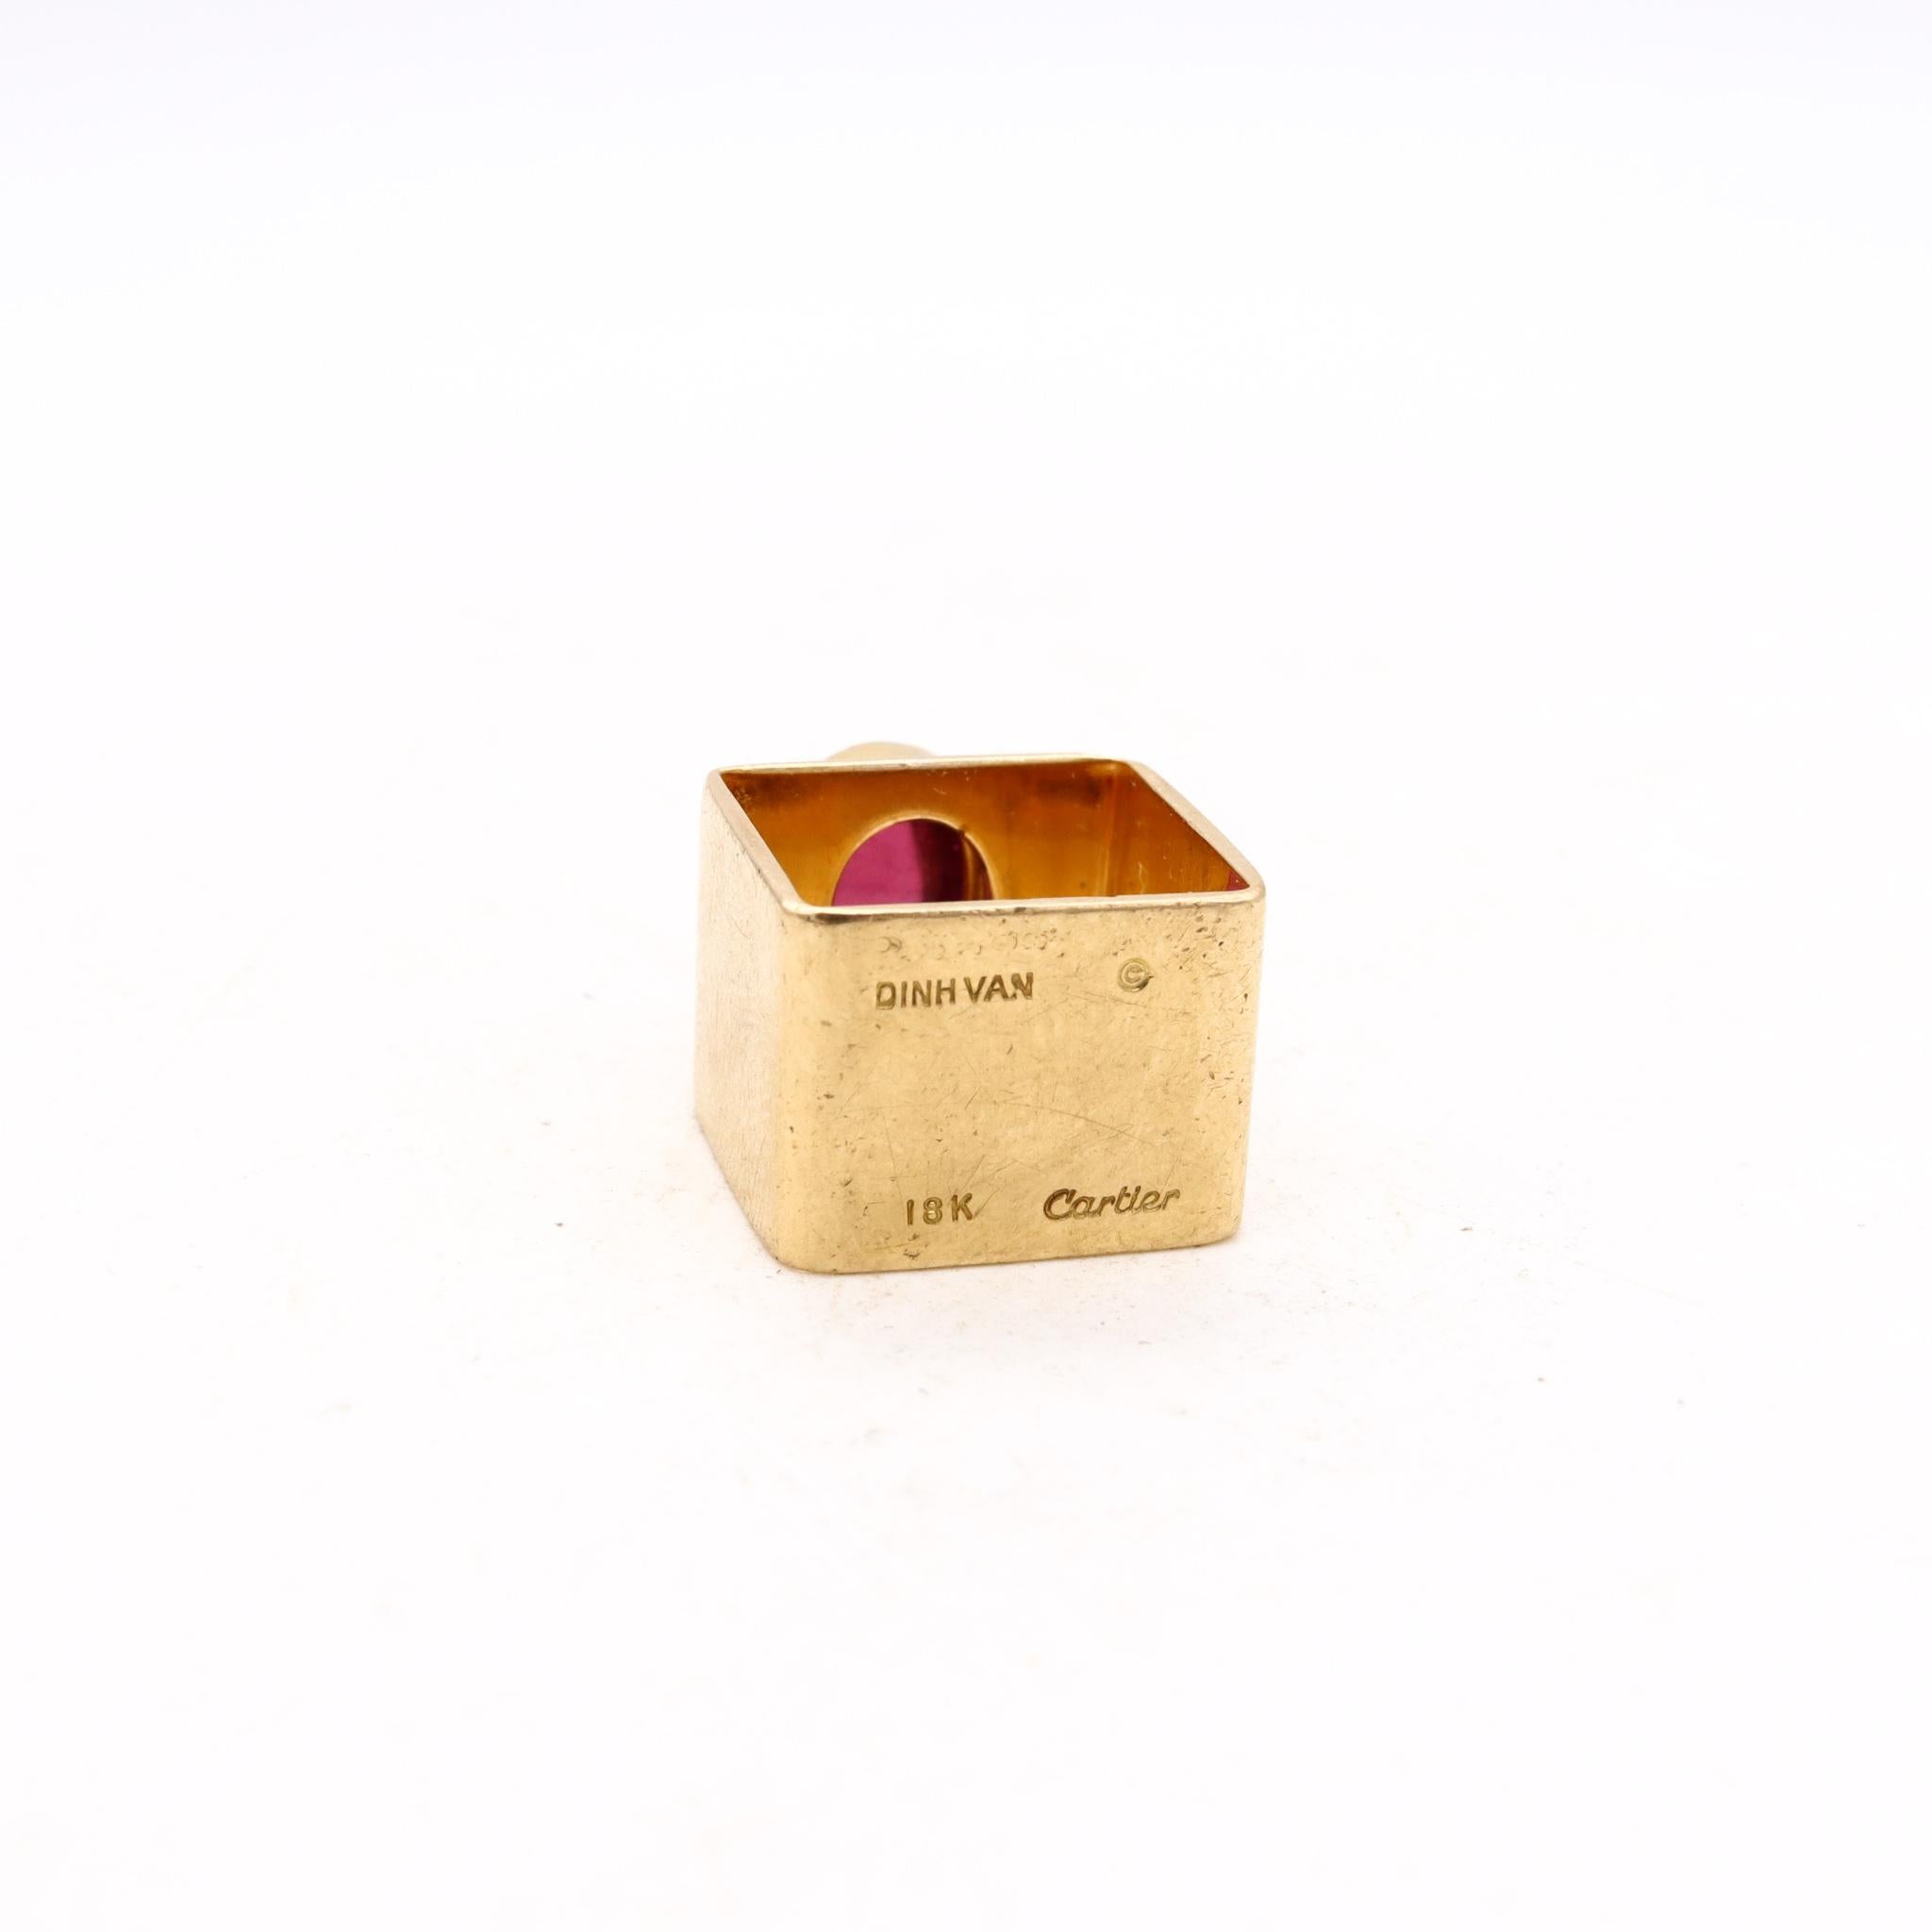 Cartier 1968 Paris Dinh Van 18Kt Gold Geometric Ring 3.27 Cts Red Tourmaline For Sale 2